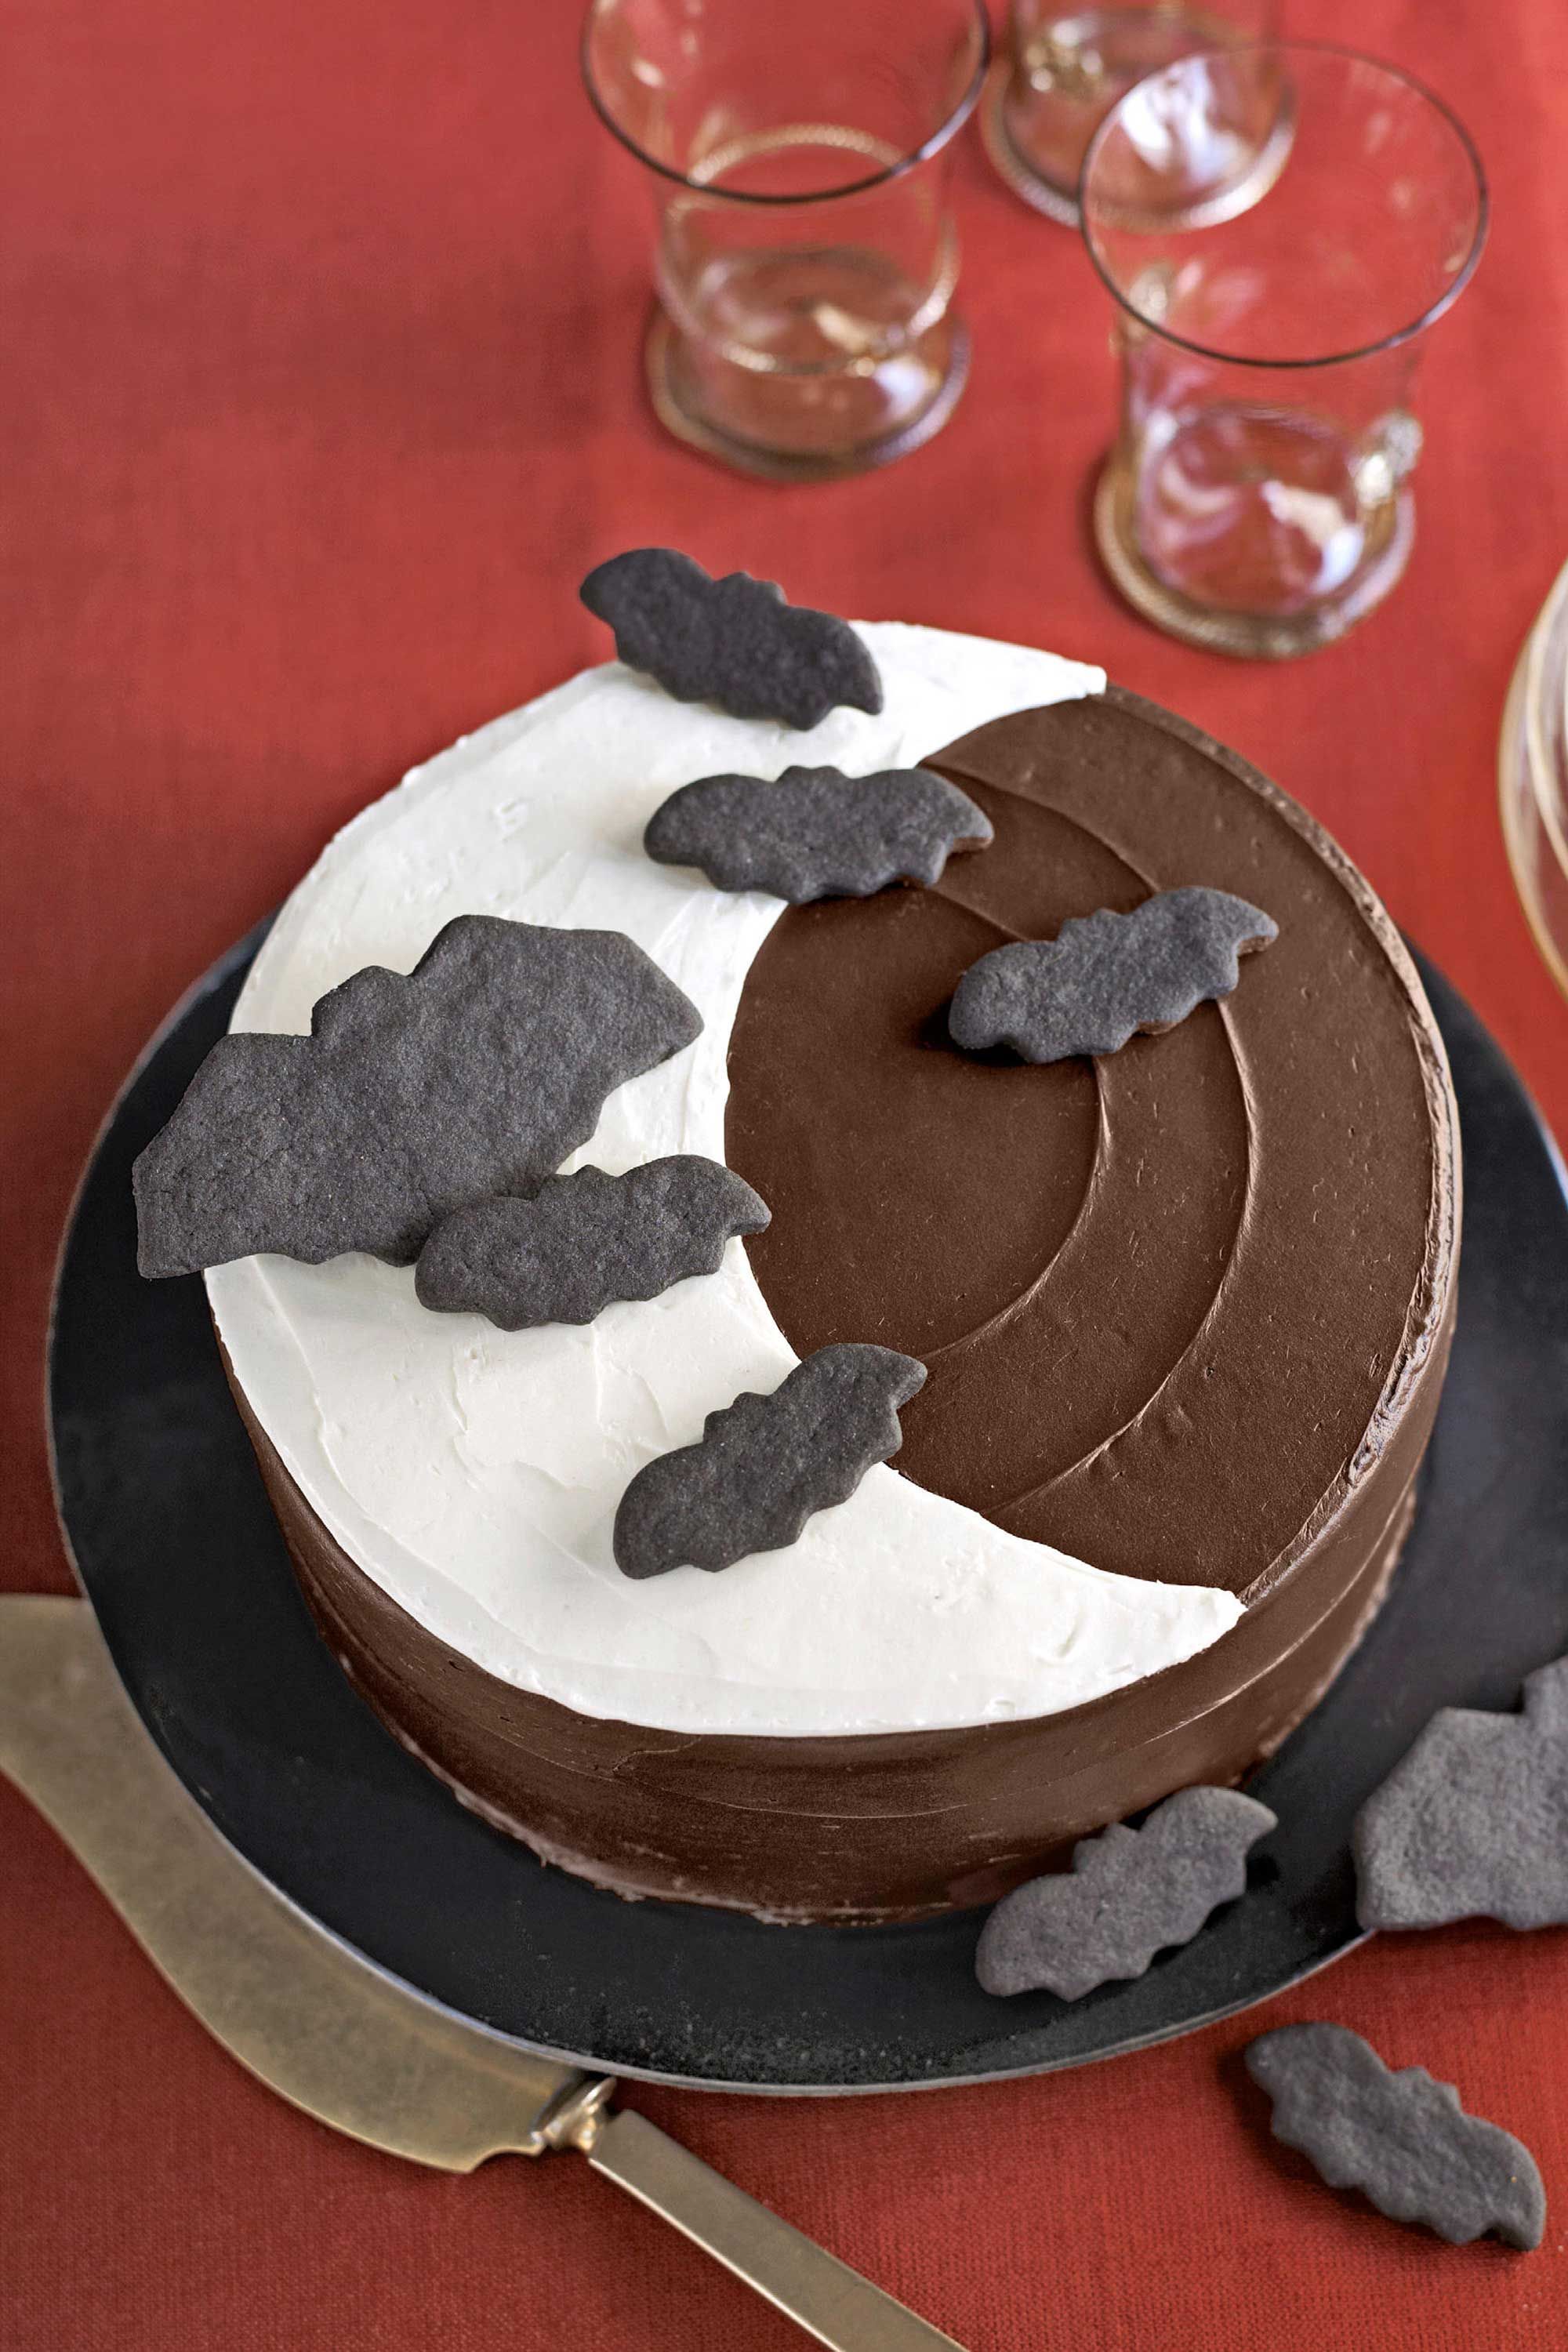 30 Spookily Easy Halloween Cake Ideas to Make at Home